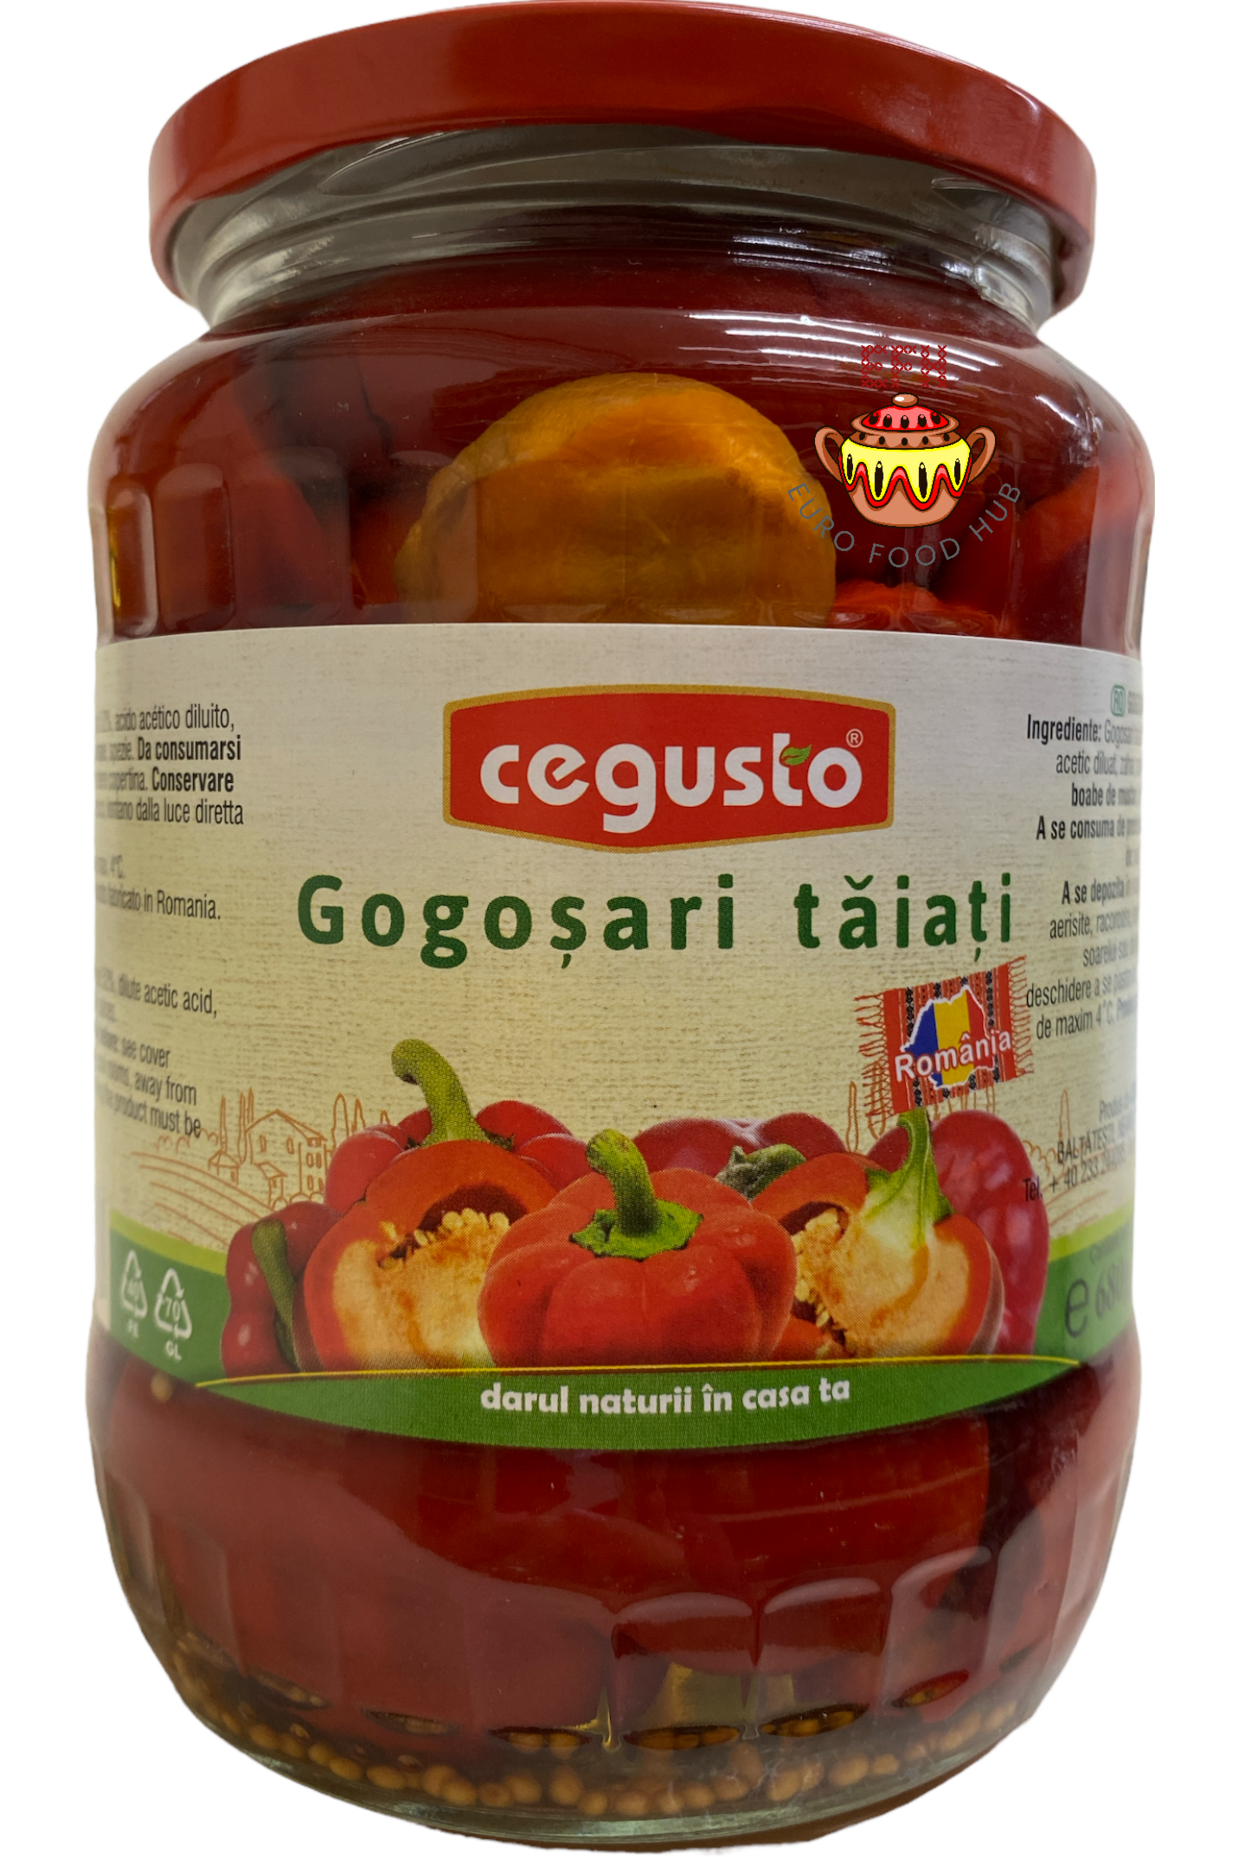 Pickled Chopped Bell Peppers - Conservfruct - GOGOSARI TAIATI 680g